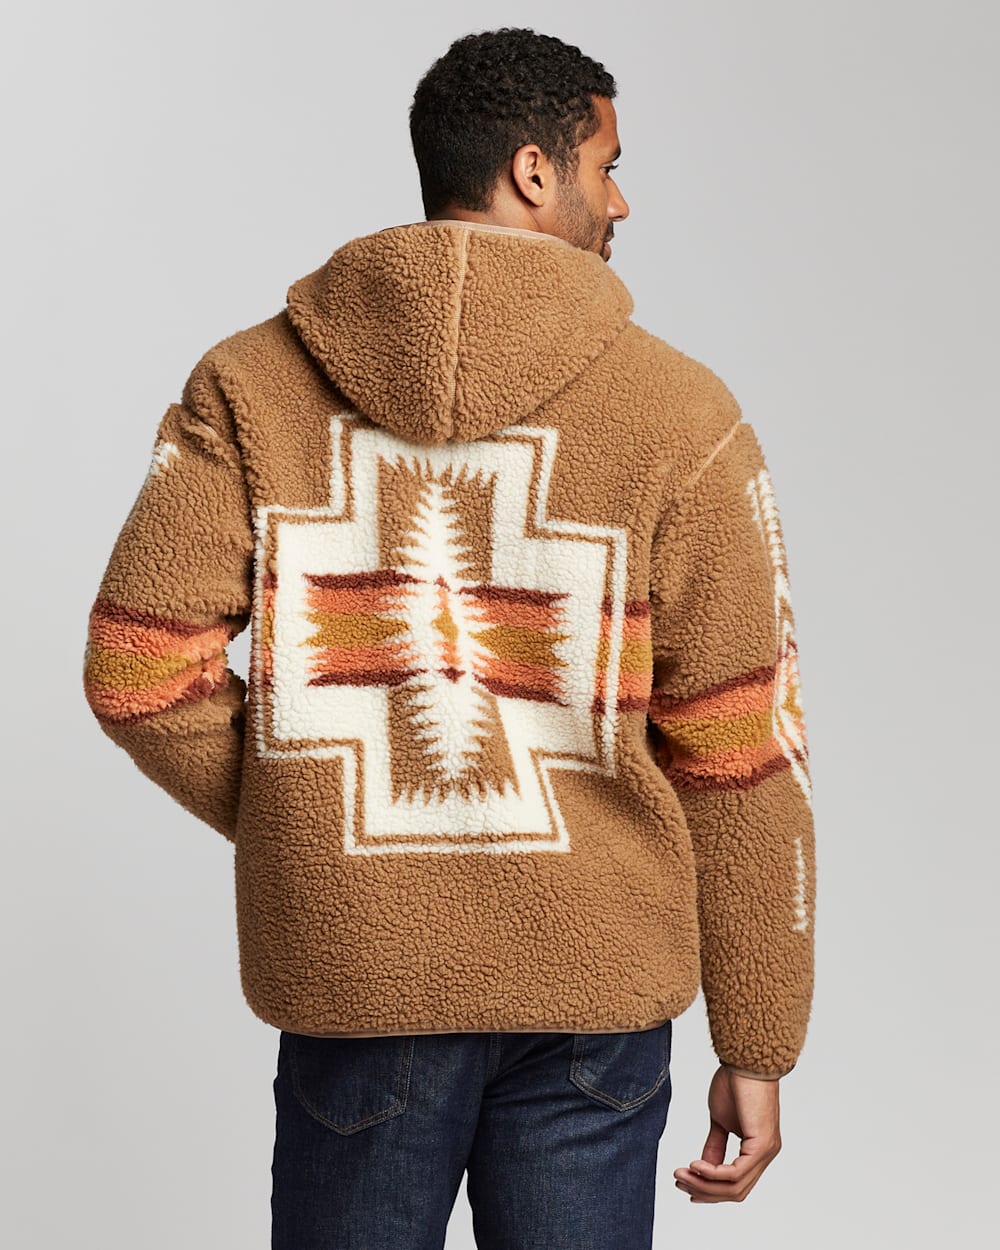 ALTERNATE VIEW OF LIMITED EDITION BOA FLEECE HOODIE IN CAMEL HARDING image number 3